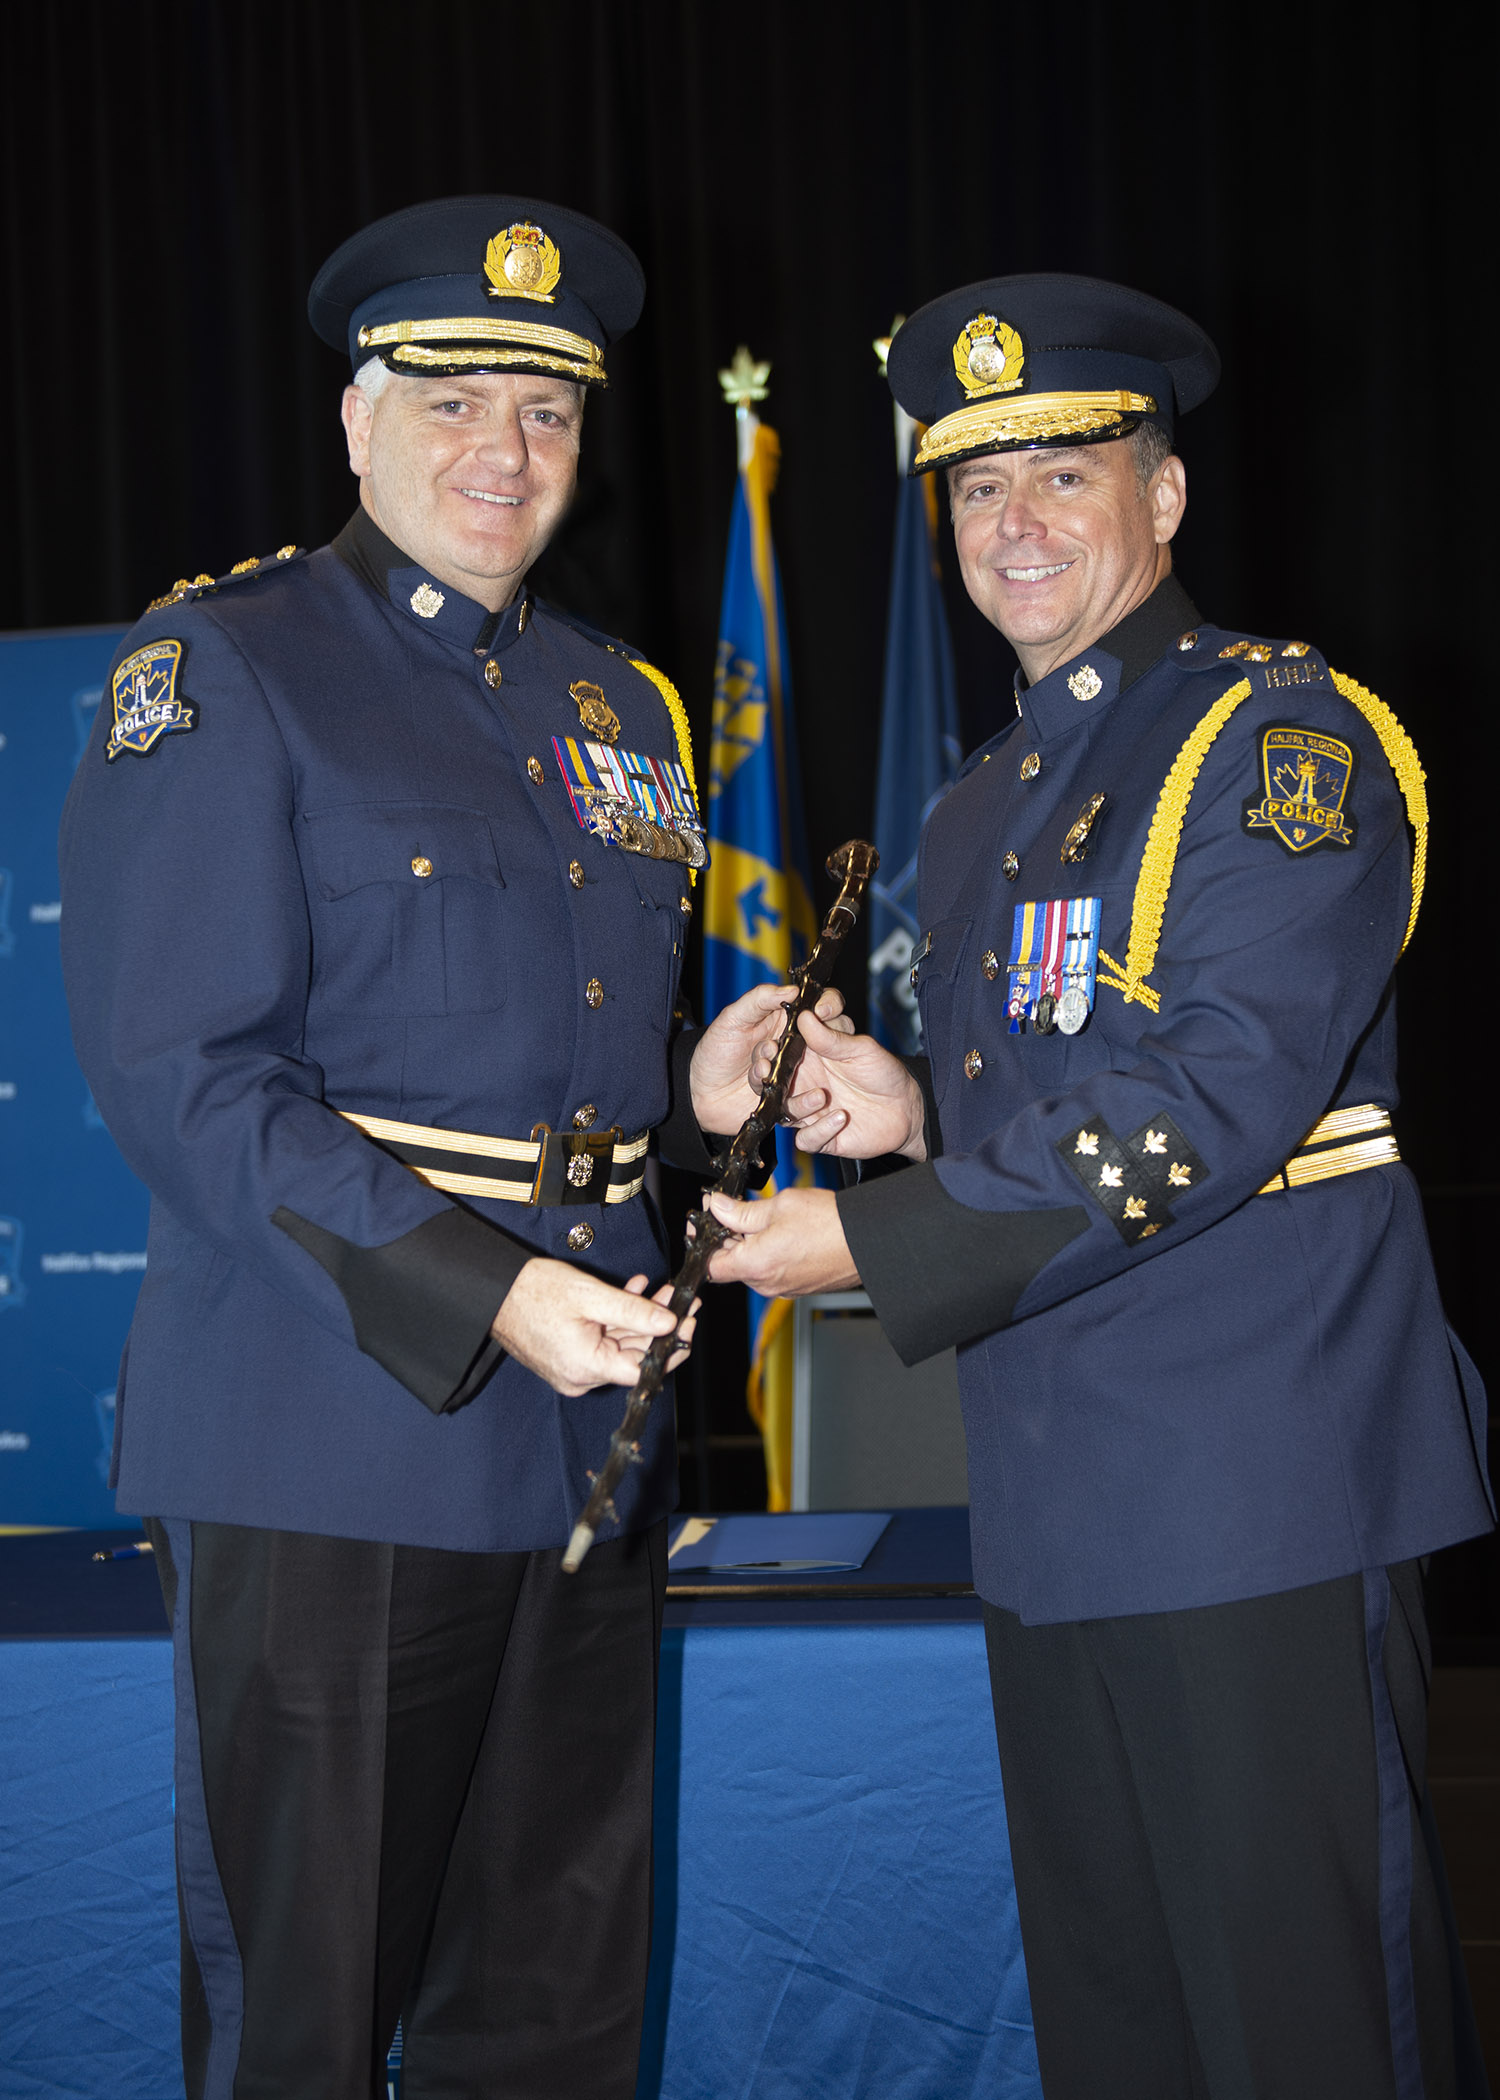 new-halifax-police-chief-installed-promises-to-be-inclusive-respectful-blue-line